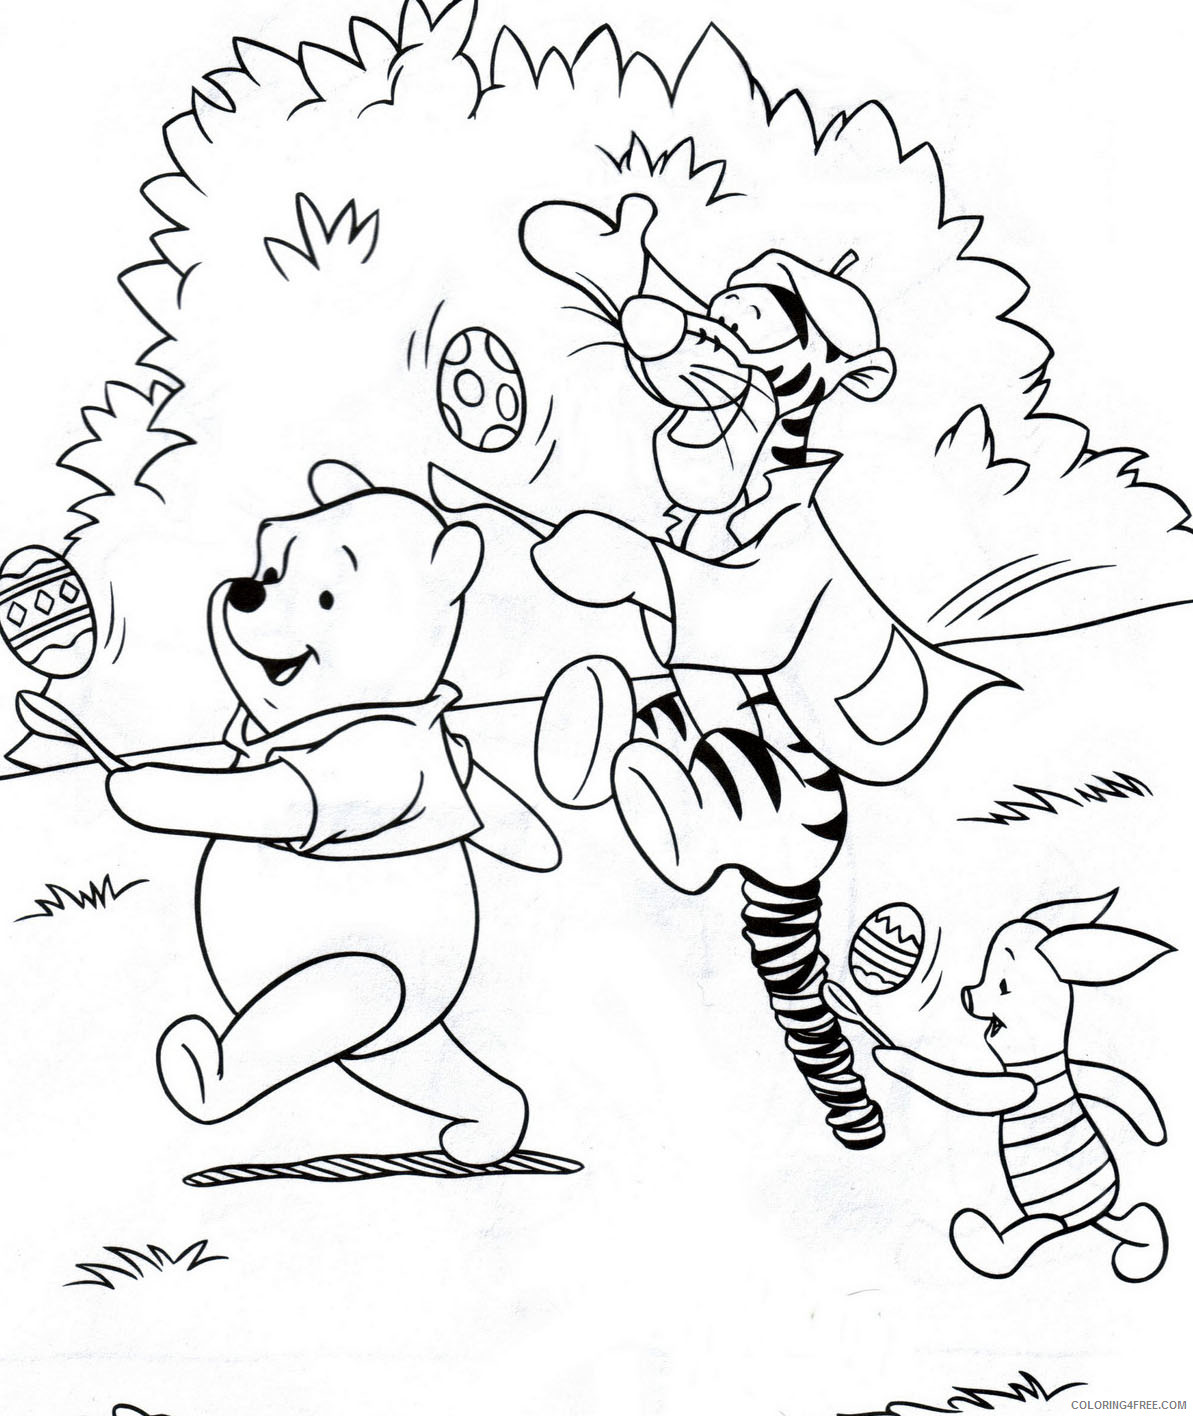 Winnie the Pooh Coloring Pages Cartoons Winnie the Pooh Easter Printable 2020 7238 Coloring4free